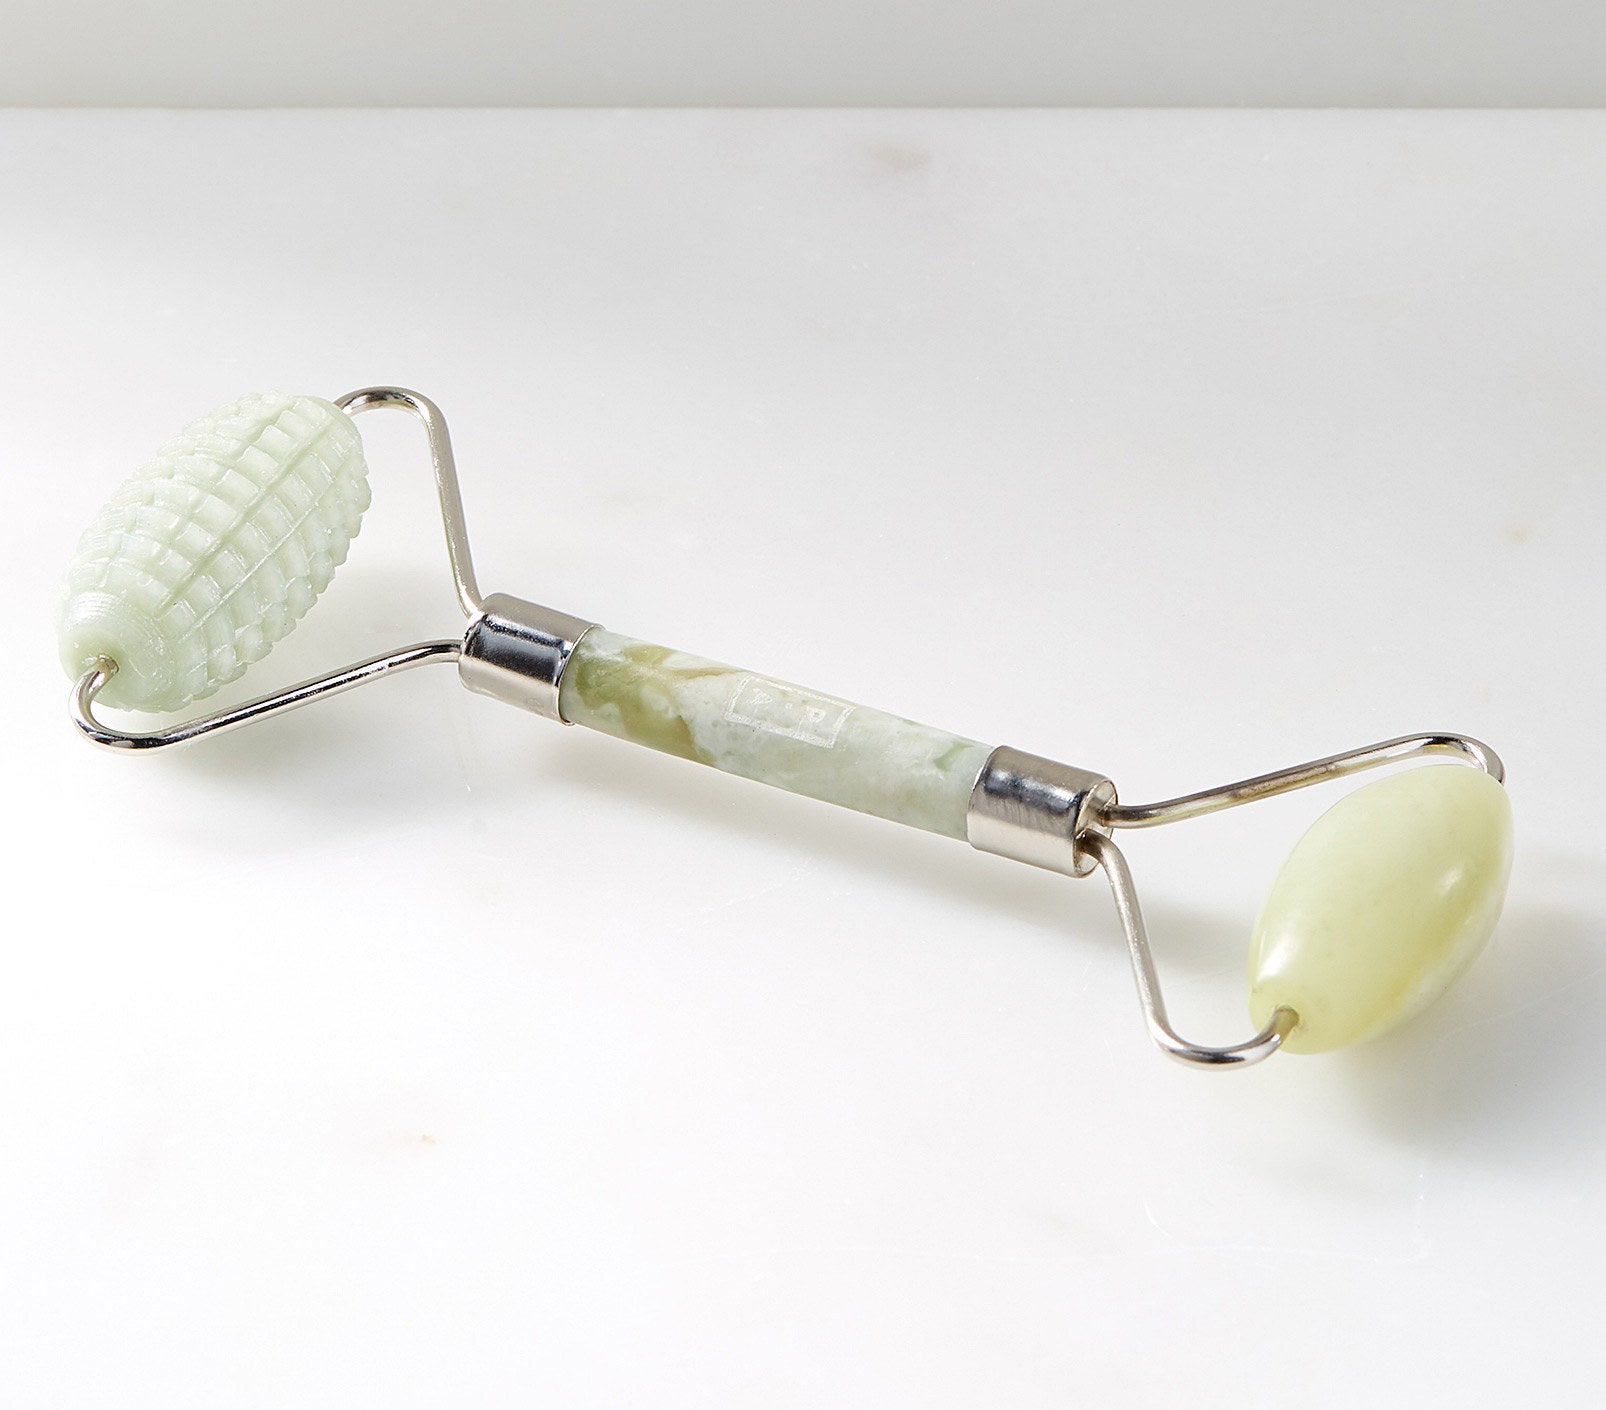 A double-sided jade roller, with one smooth side and one rigid side for massaging 